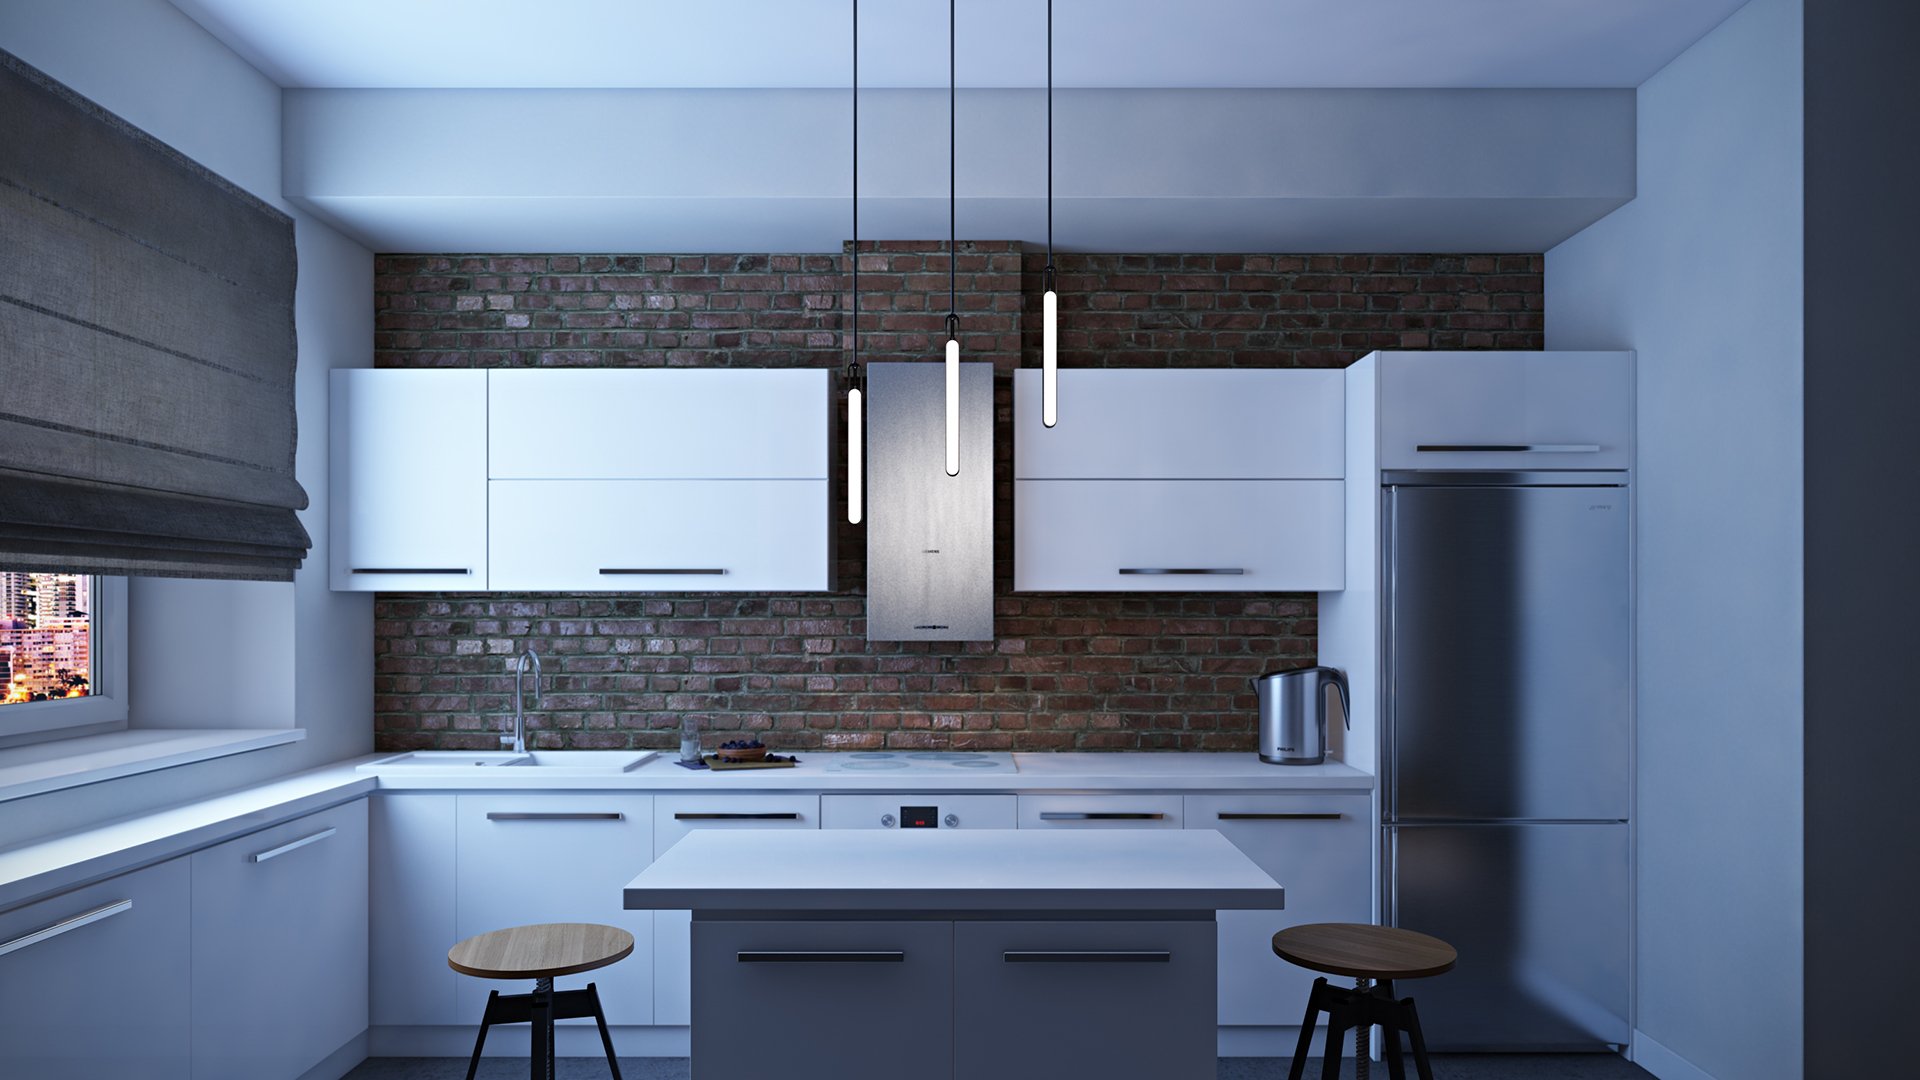 Kitchen Lifestyle CG Render for a Lamp